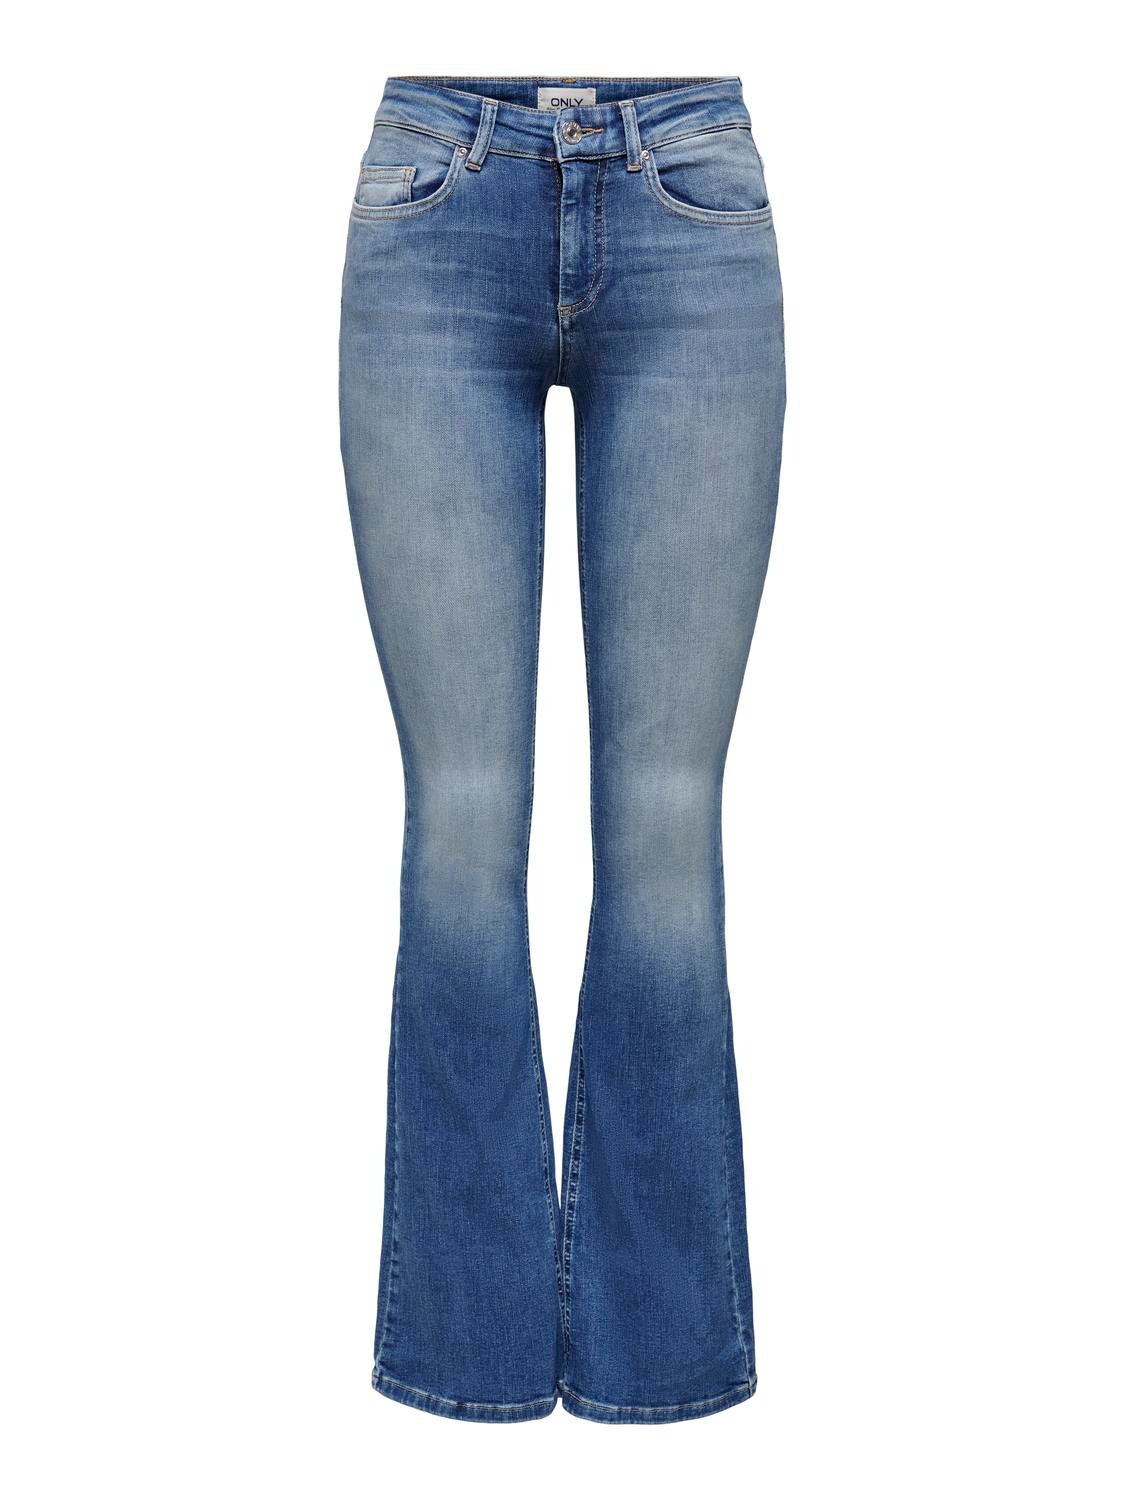 Sweet Junior Flared jeans for girls: for sale at 19.99€ on